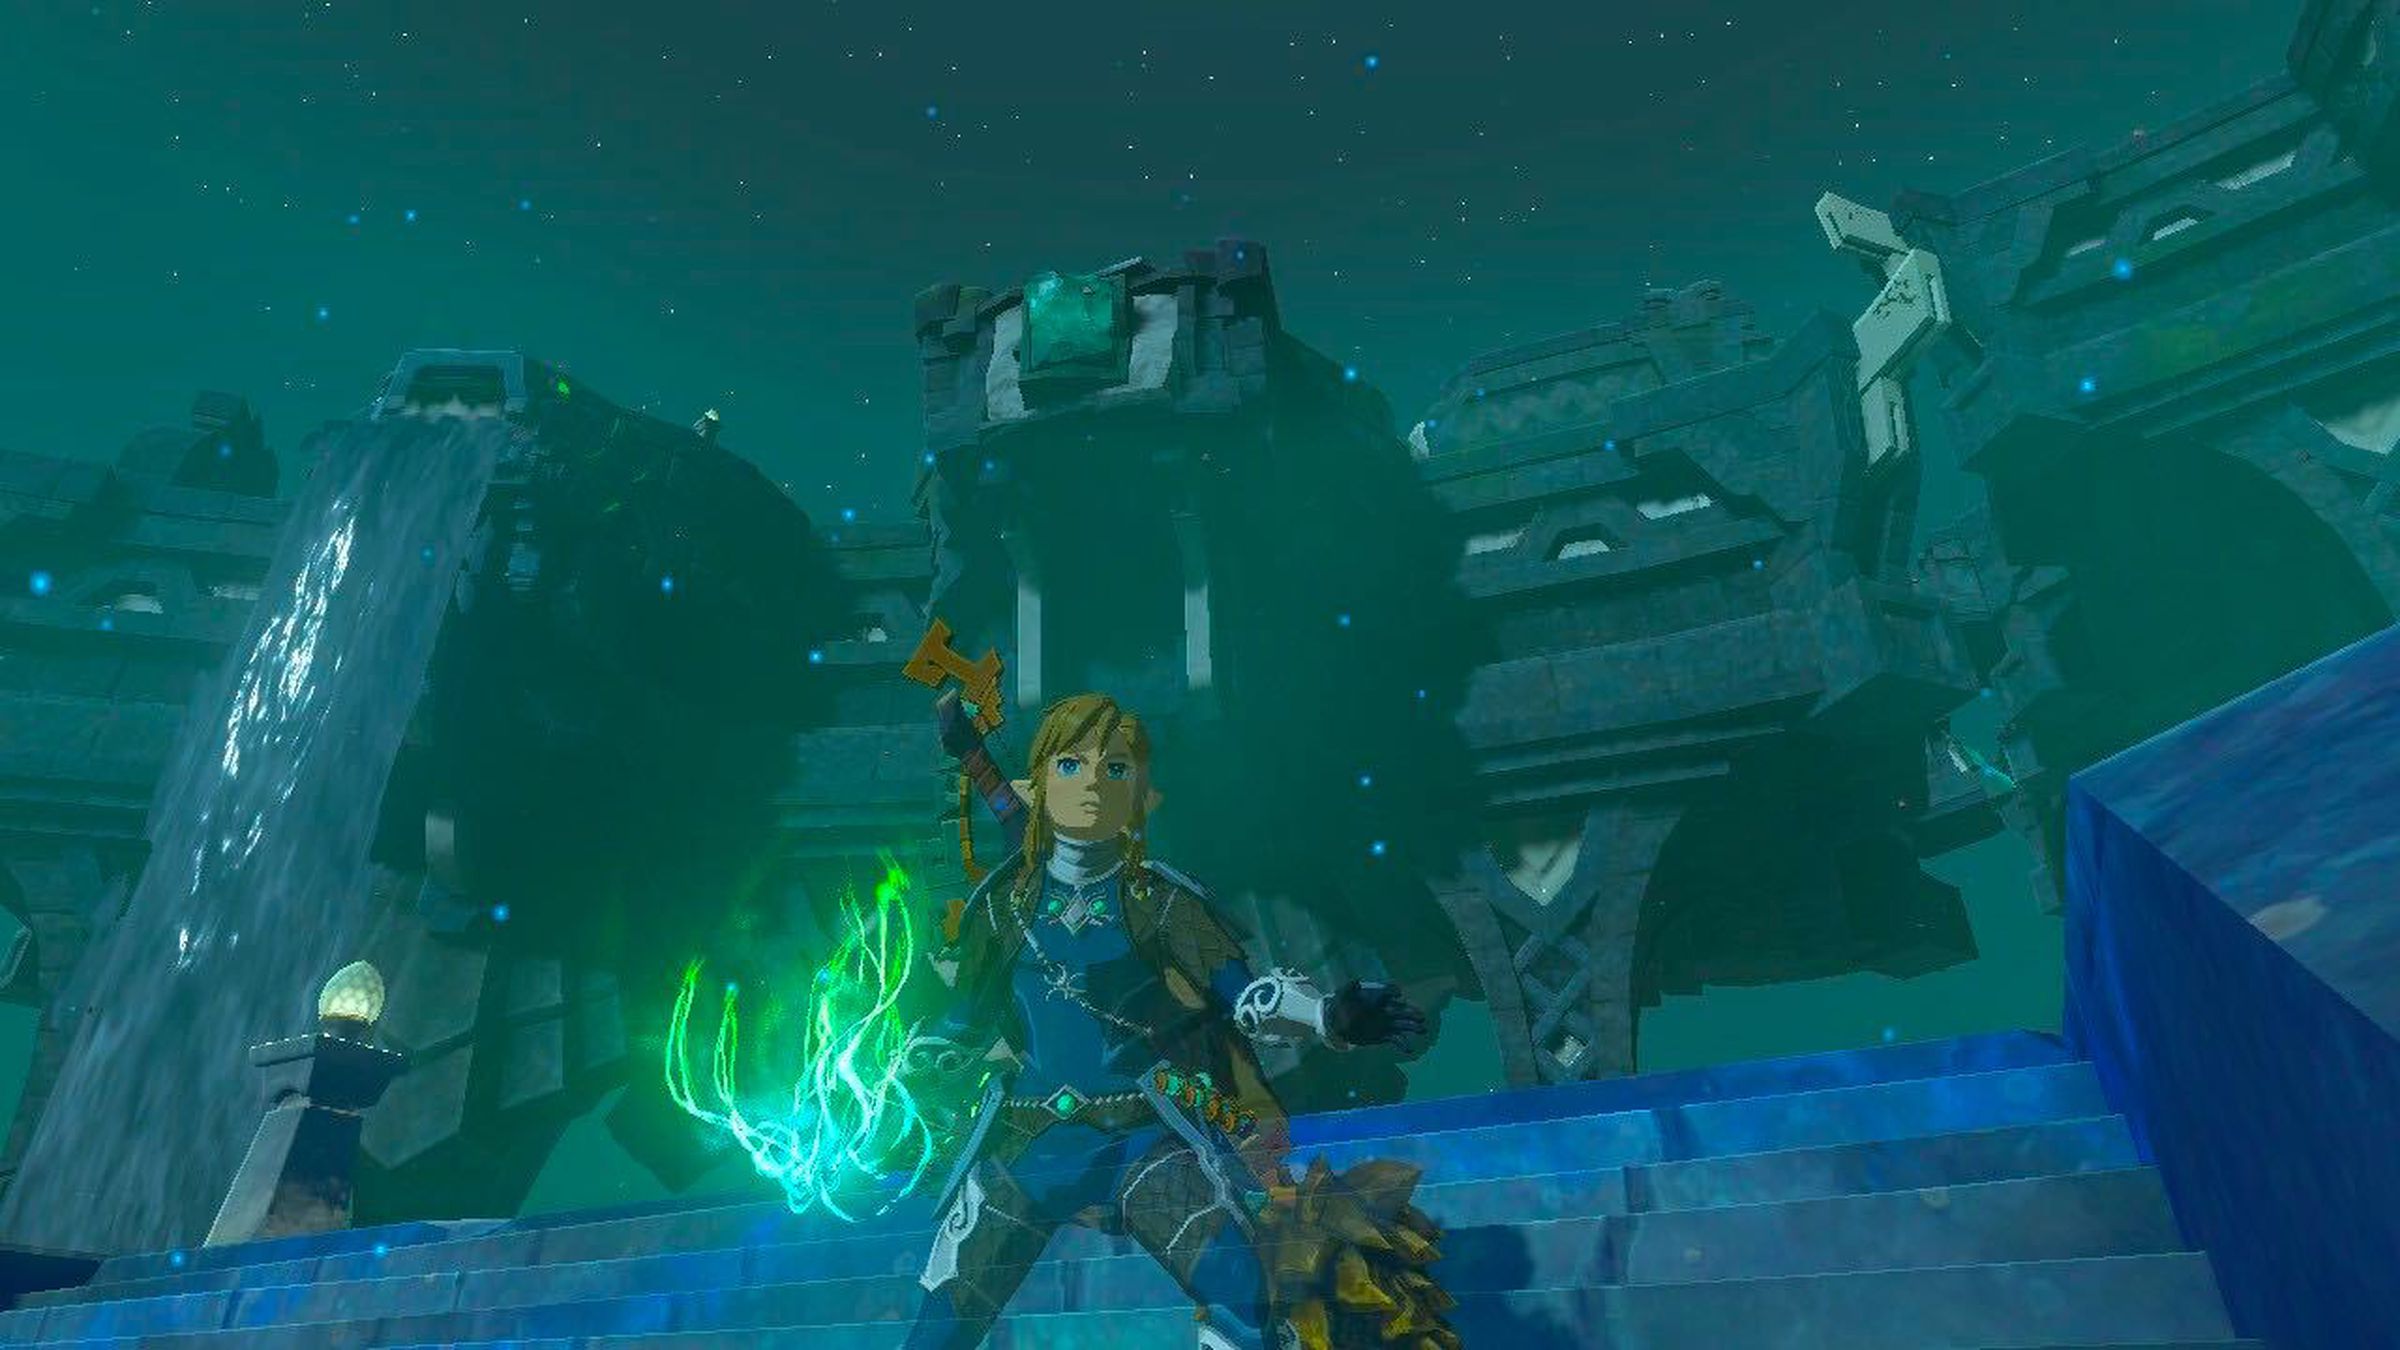 Link using the Fuse ability.